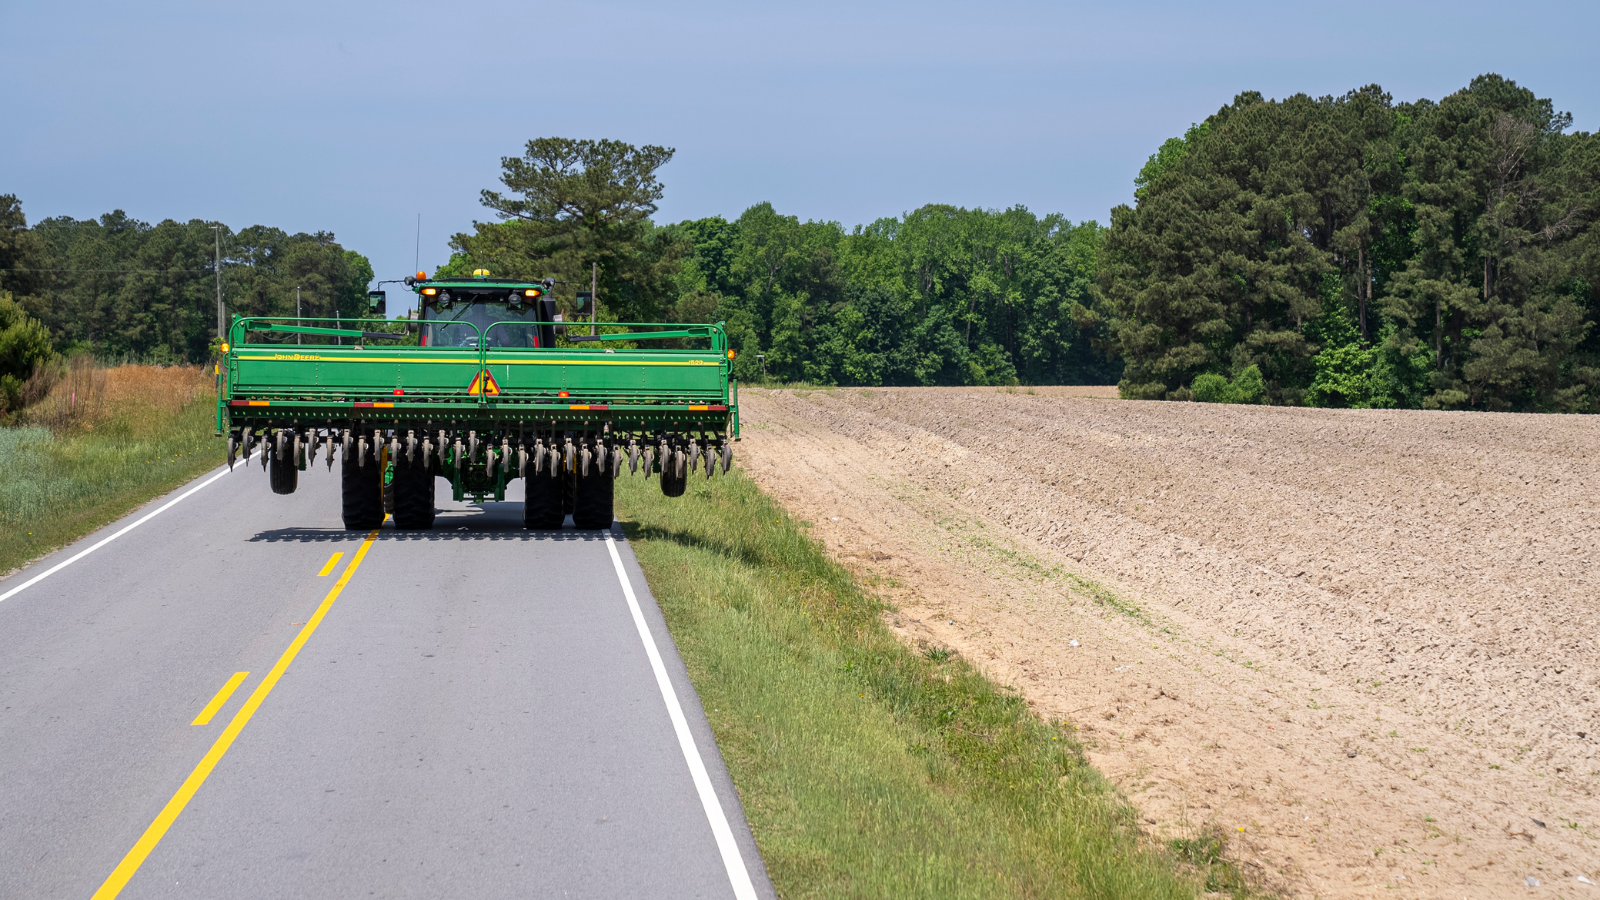 Planting season means sharing the roads with farm equipment